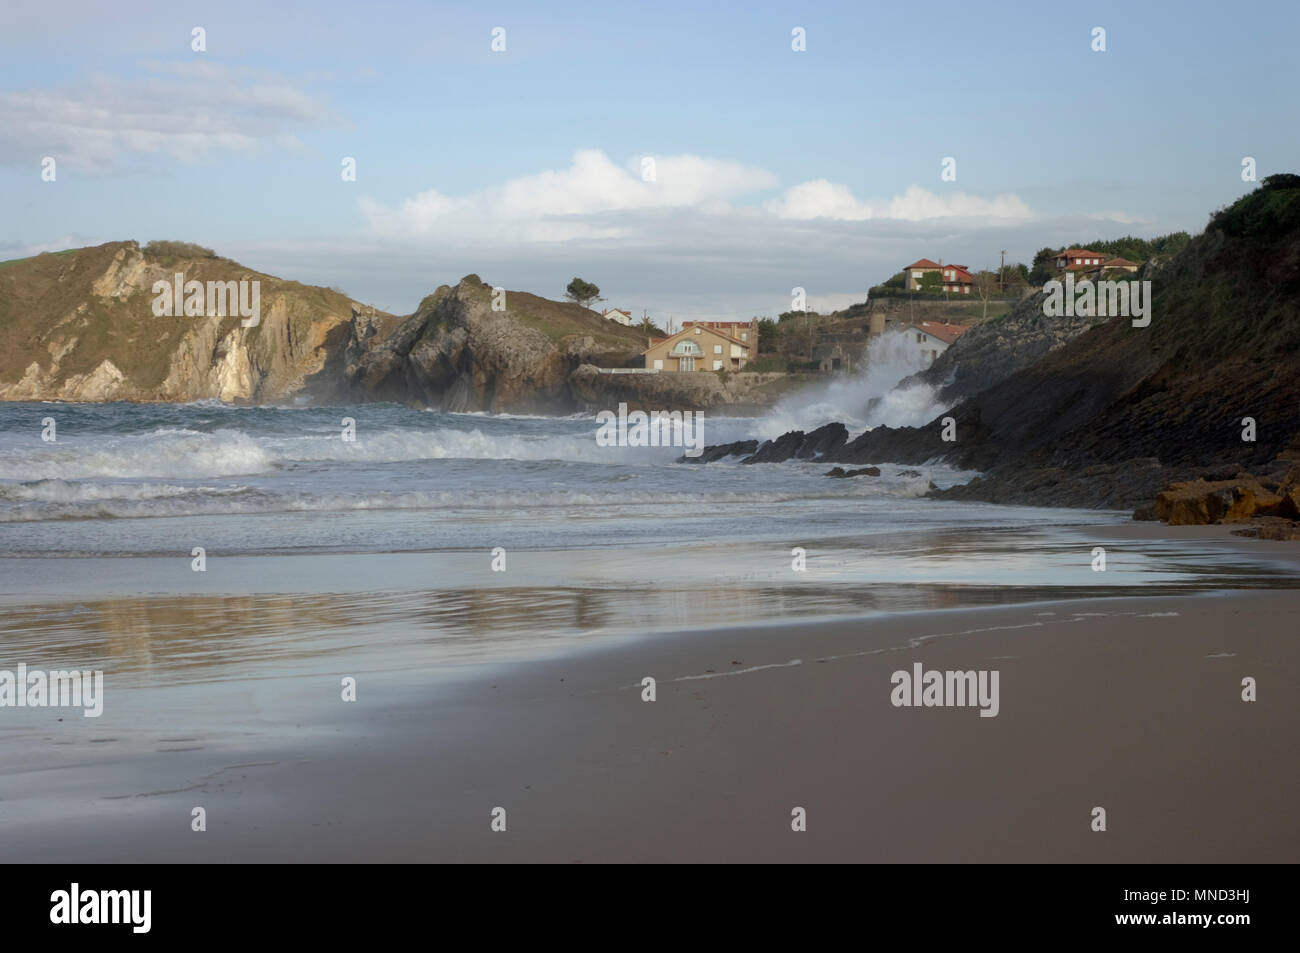 Waves and wind in Comillas, Cantabria Spain. Stock Photo